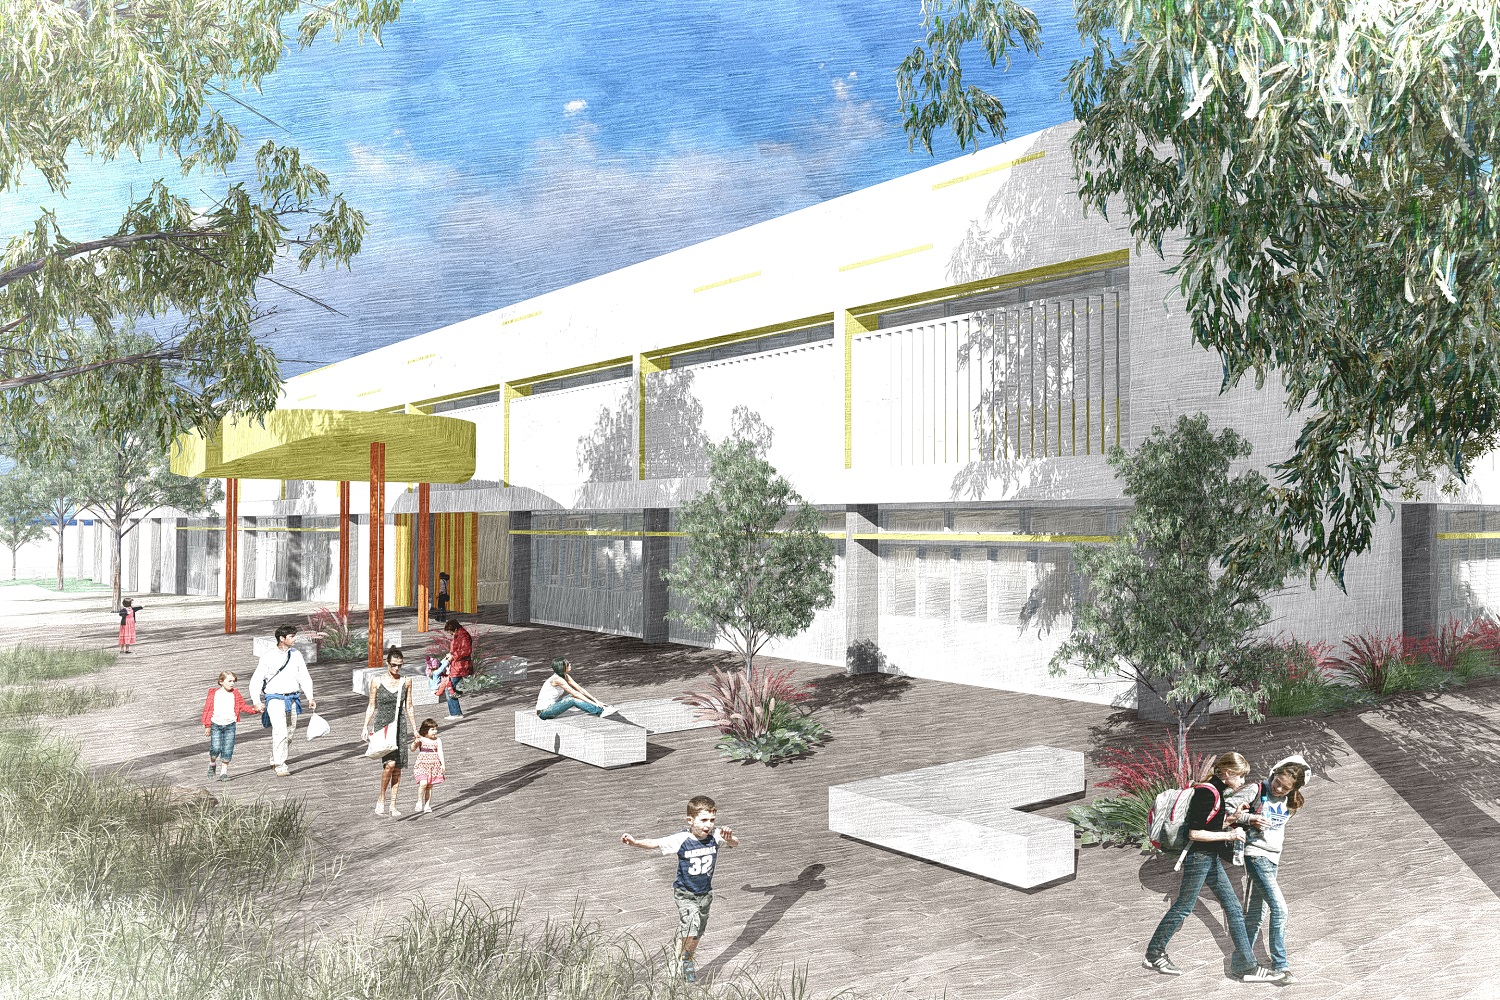 New North Kellyville Primary School approval